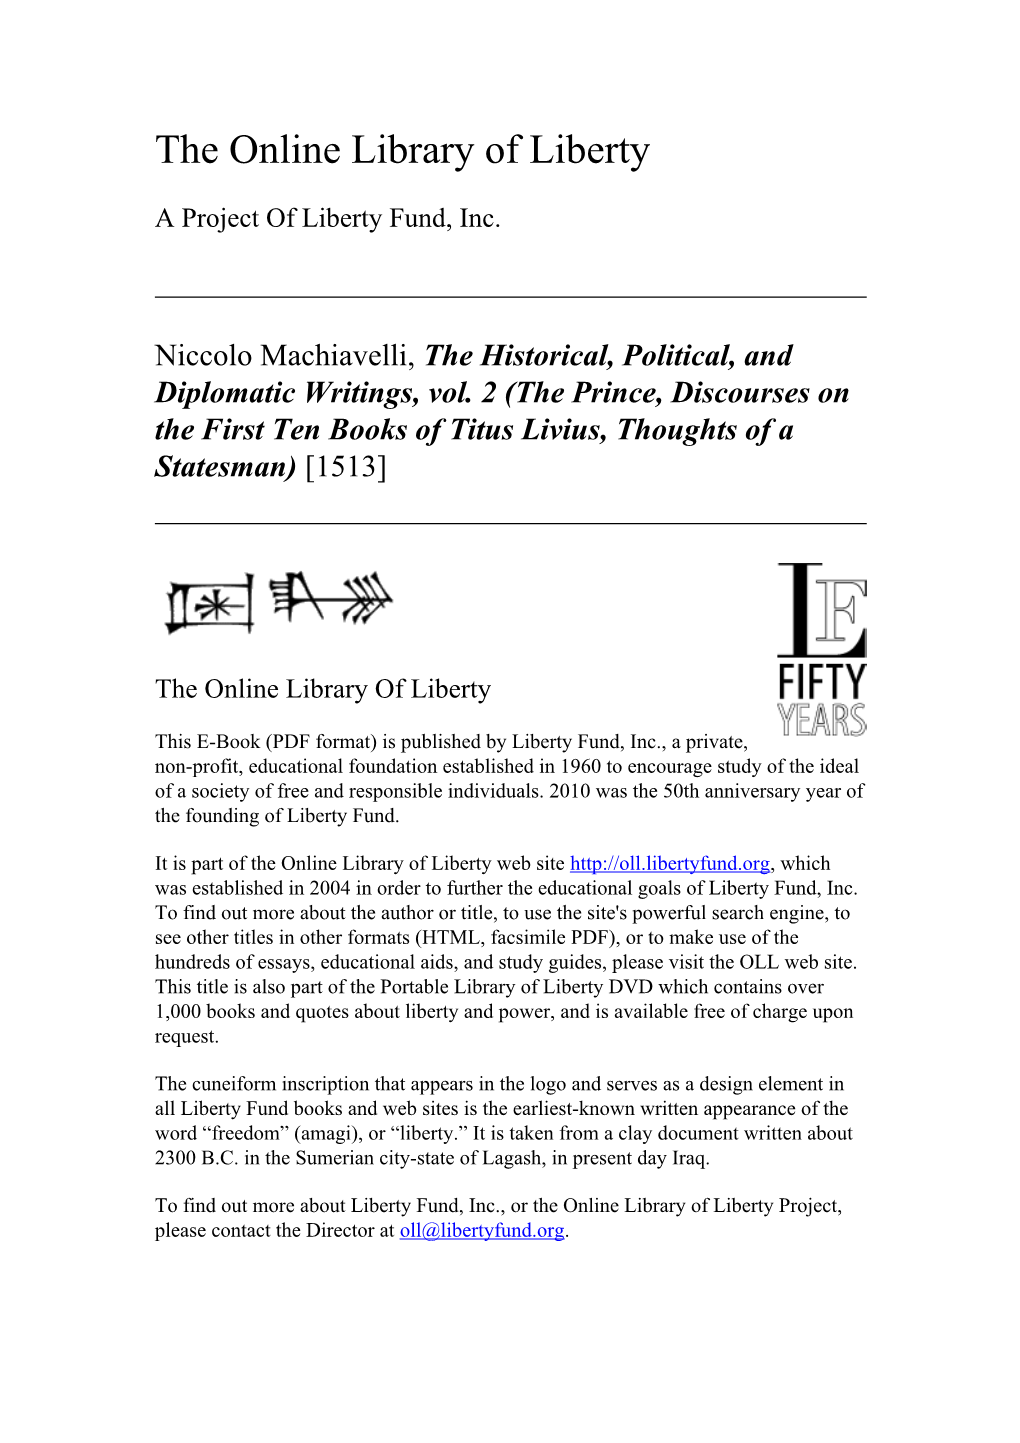 Online Library of Liberty: the Historical, Political, and Diplomatic Writings, Vol